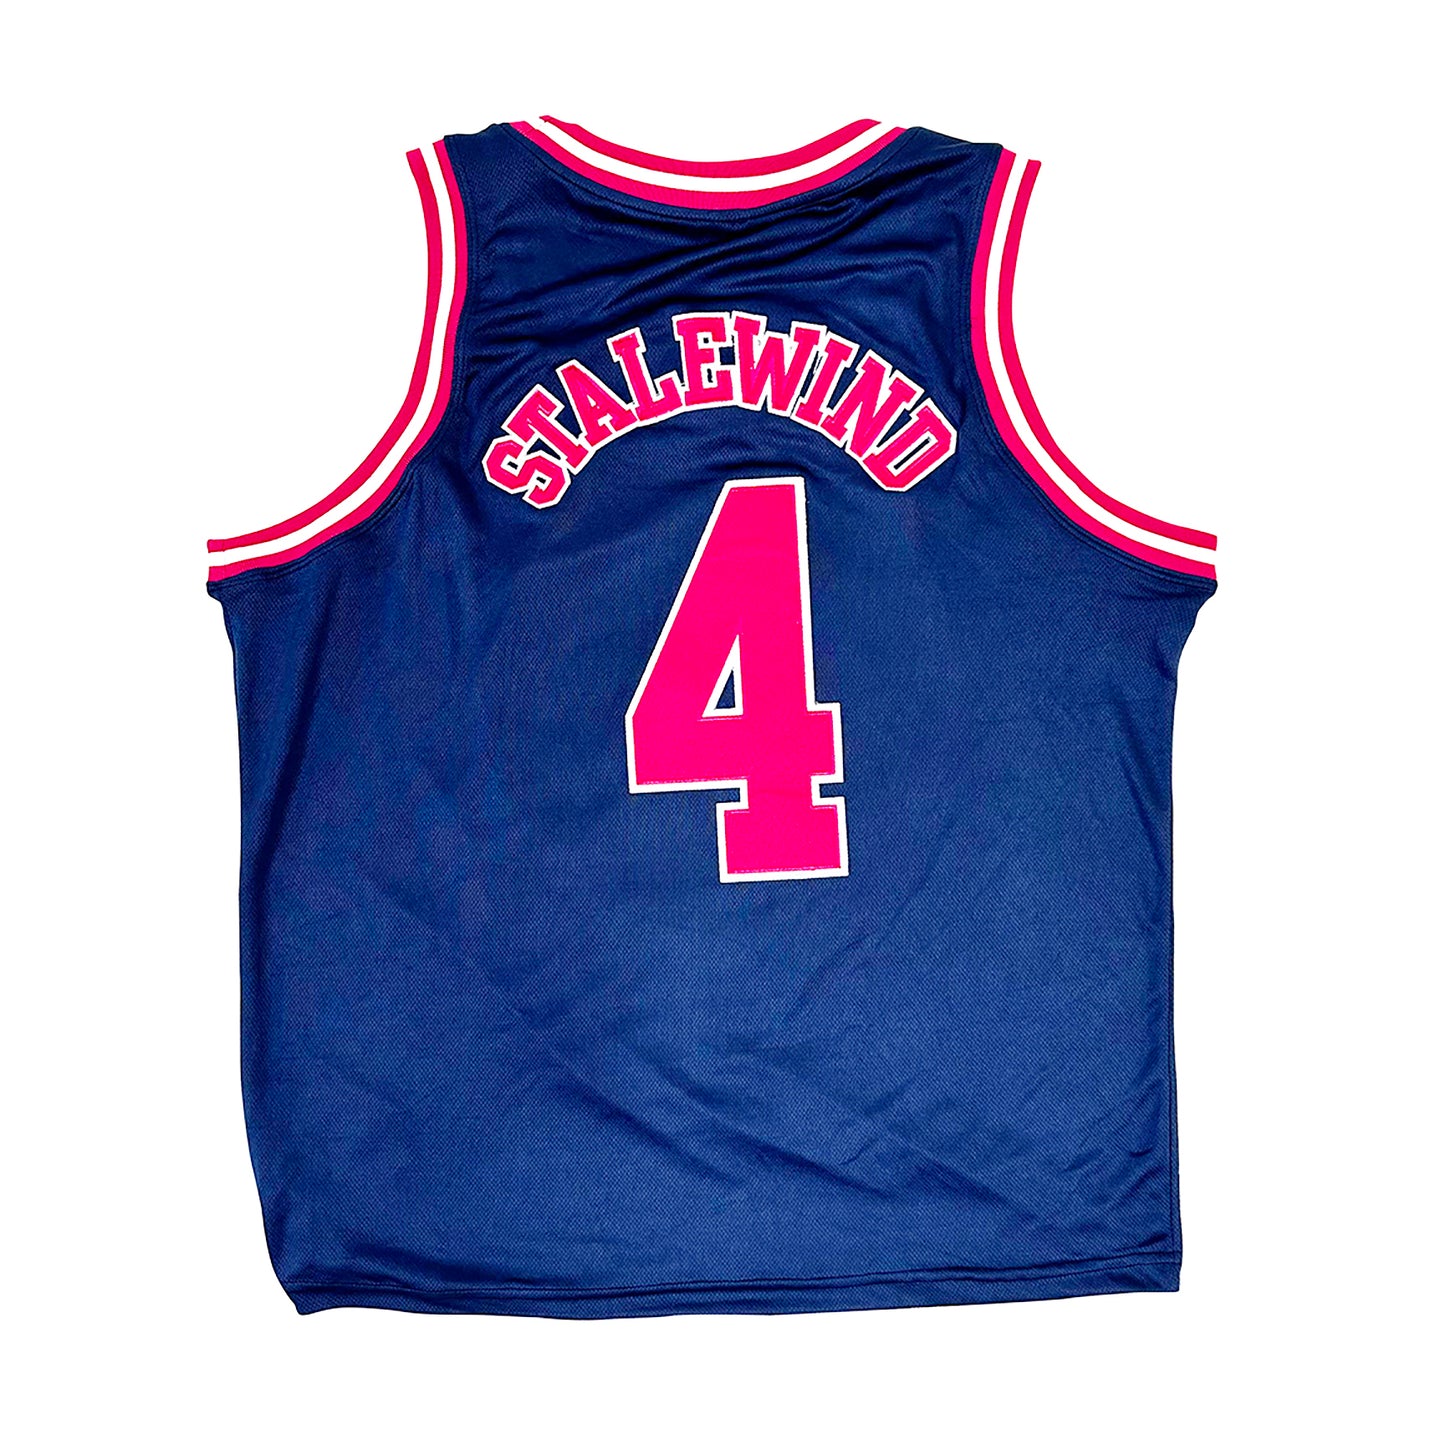 Official Ouija Macc Basketball jersey - Stalewind[RUNS SMALL ORDER A SIZE UP]